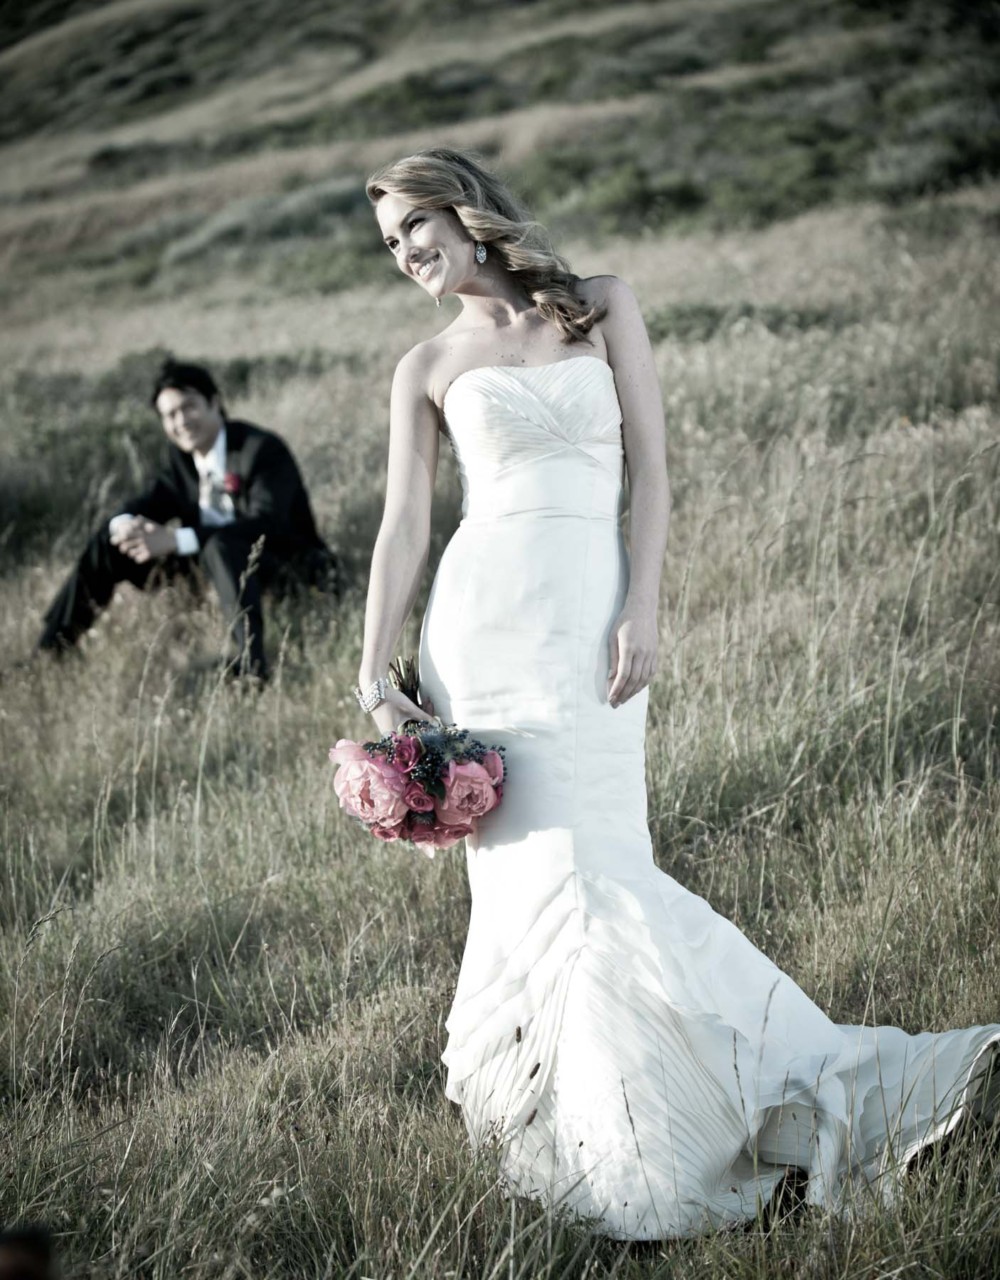 Looking for a budget wedding photographer in Eagle River?